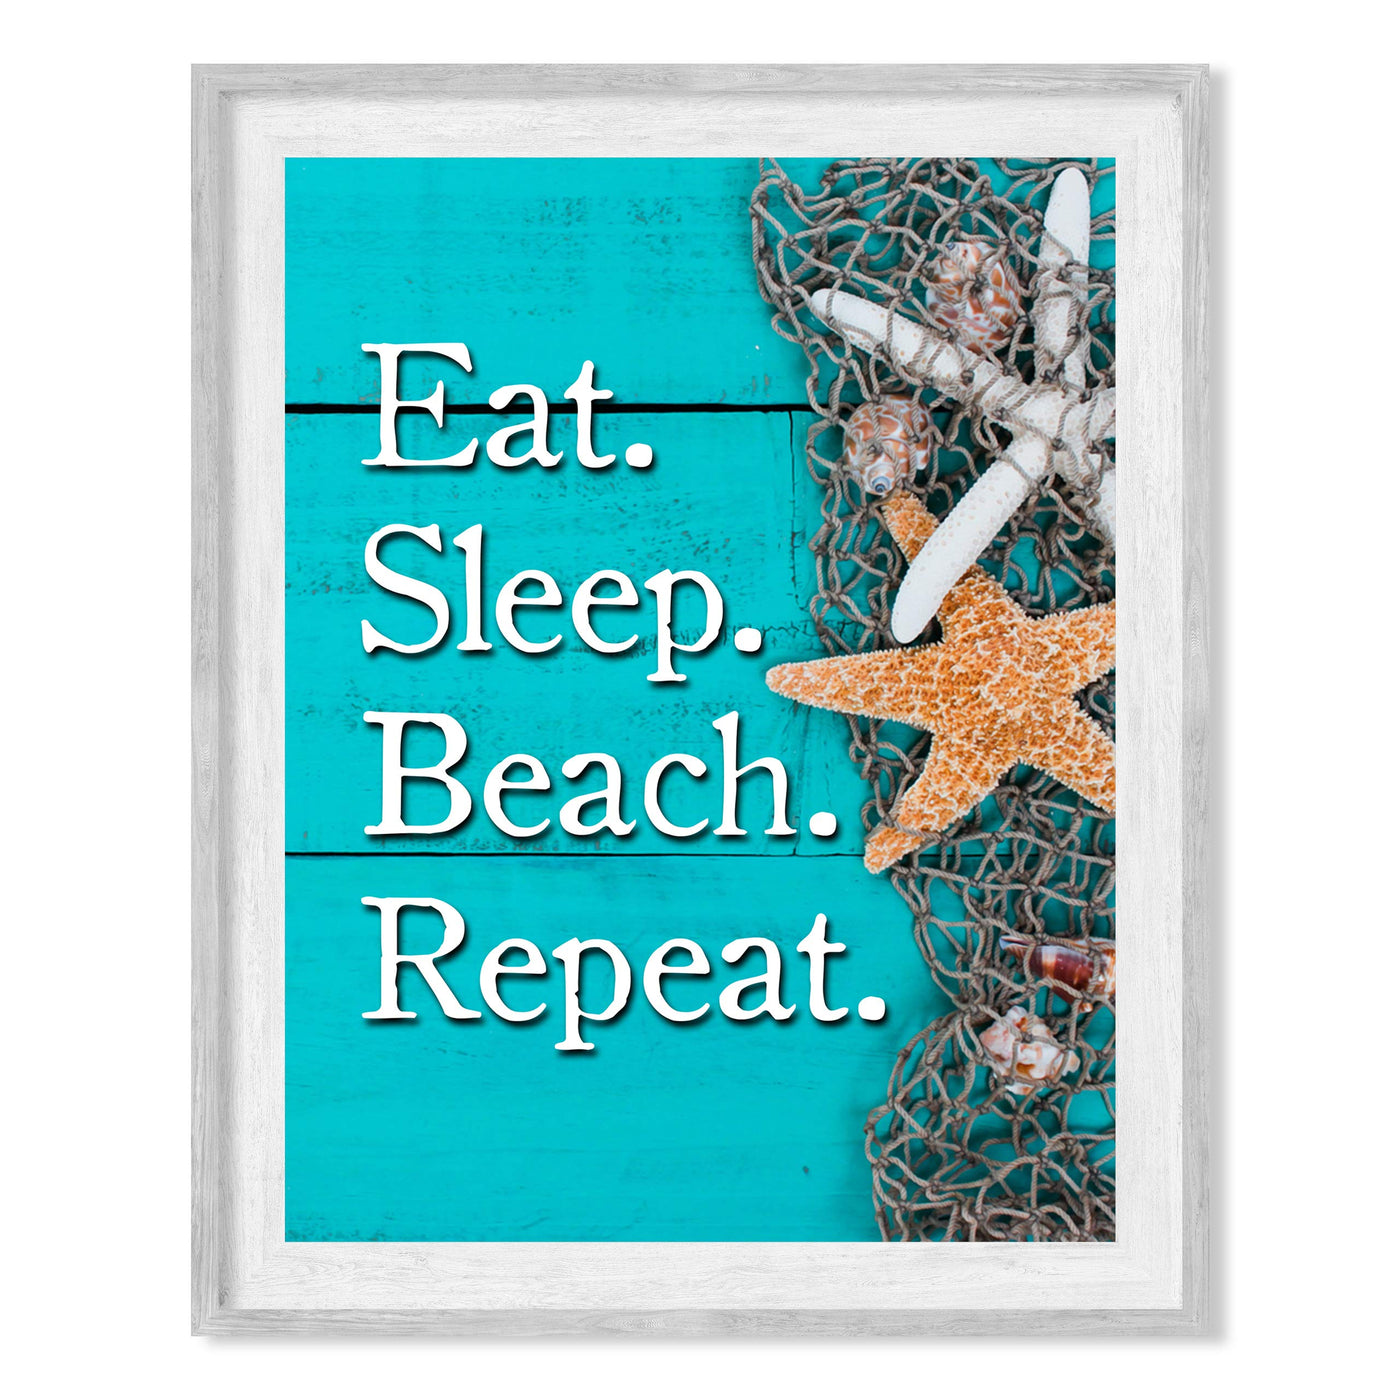 Eat. Sleep. Beach. Repeat Inspirational Beach-Ocean Themed Sign -8 x 10" Wall Print w/Starfish Images-Ready to Frame. Replica Distressed Wood Design. Perfect Home-Beach House-Nautical Decor!